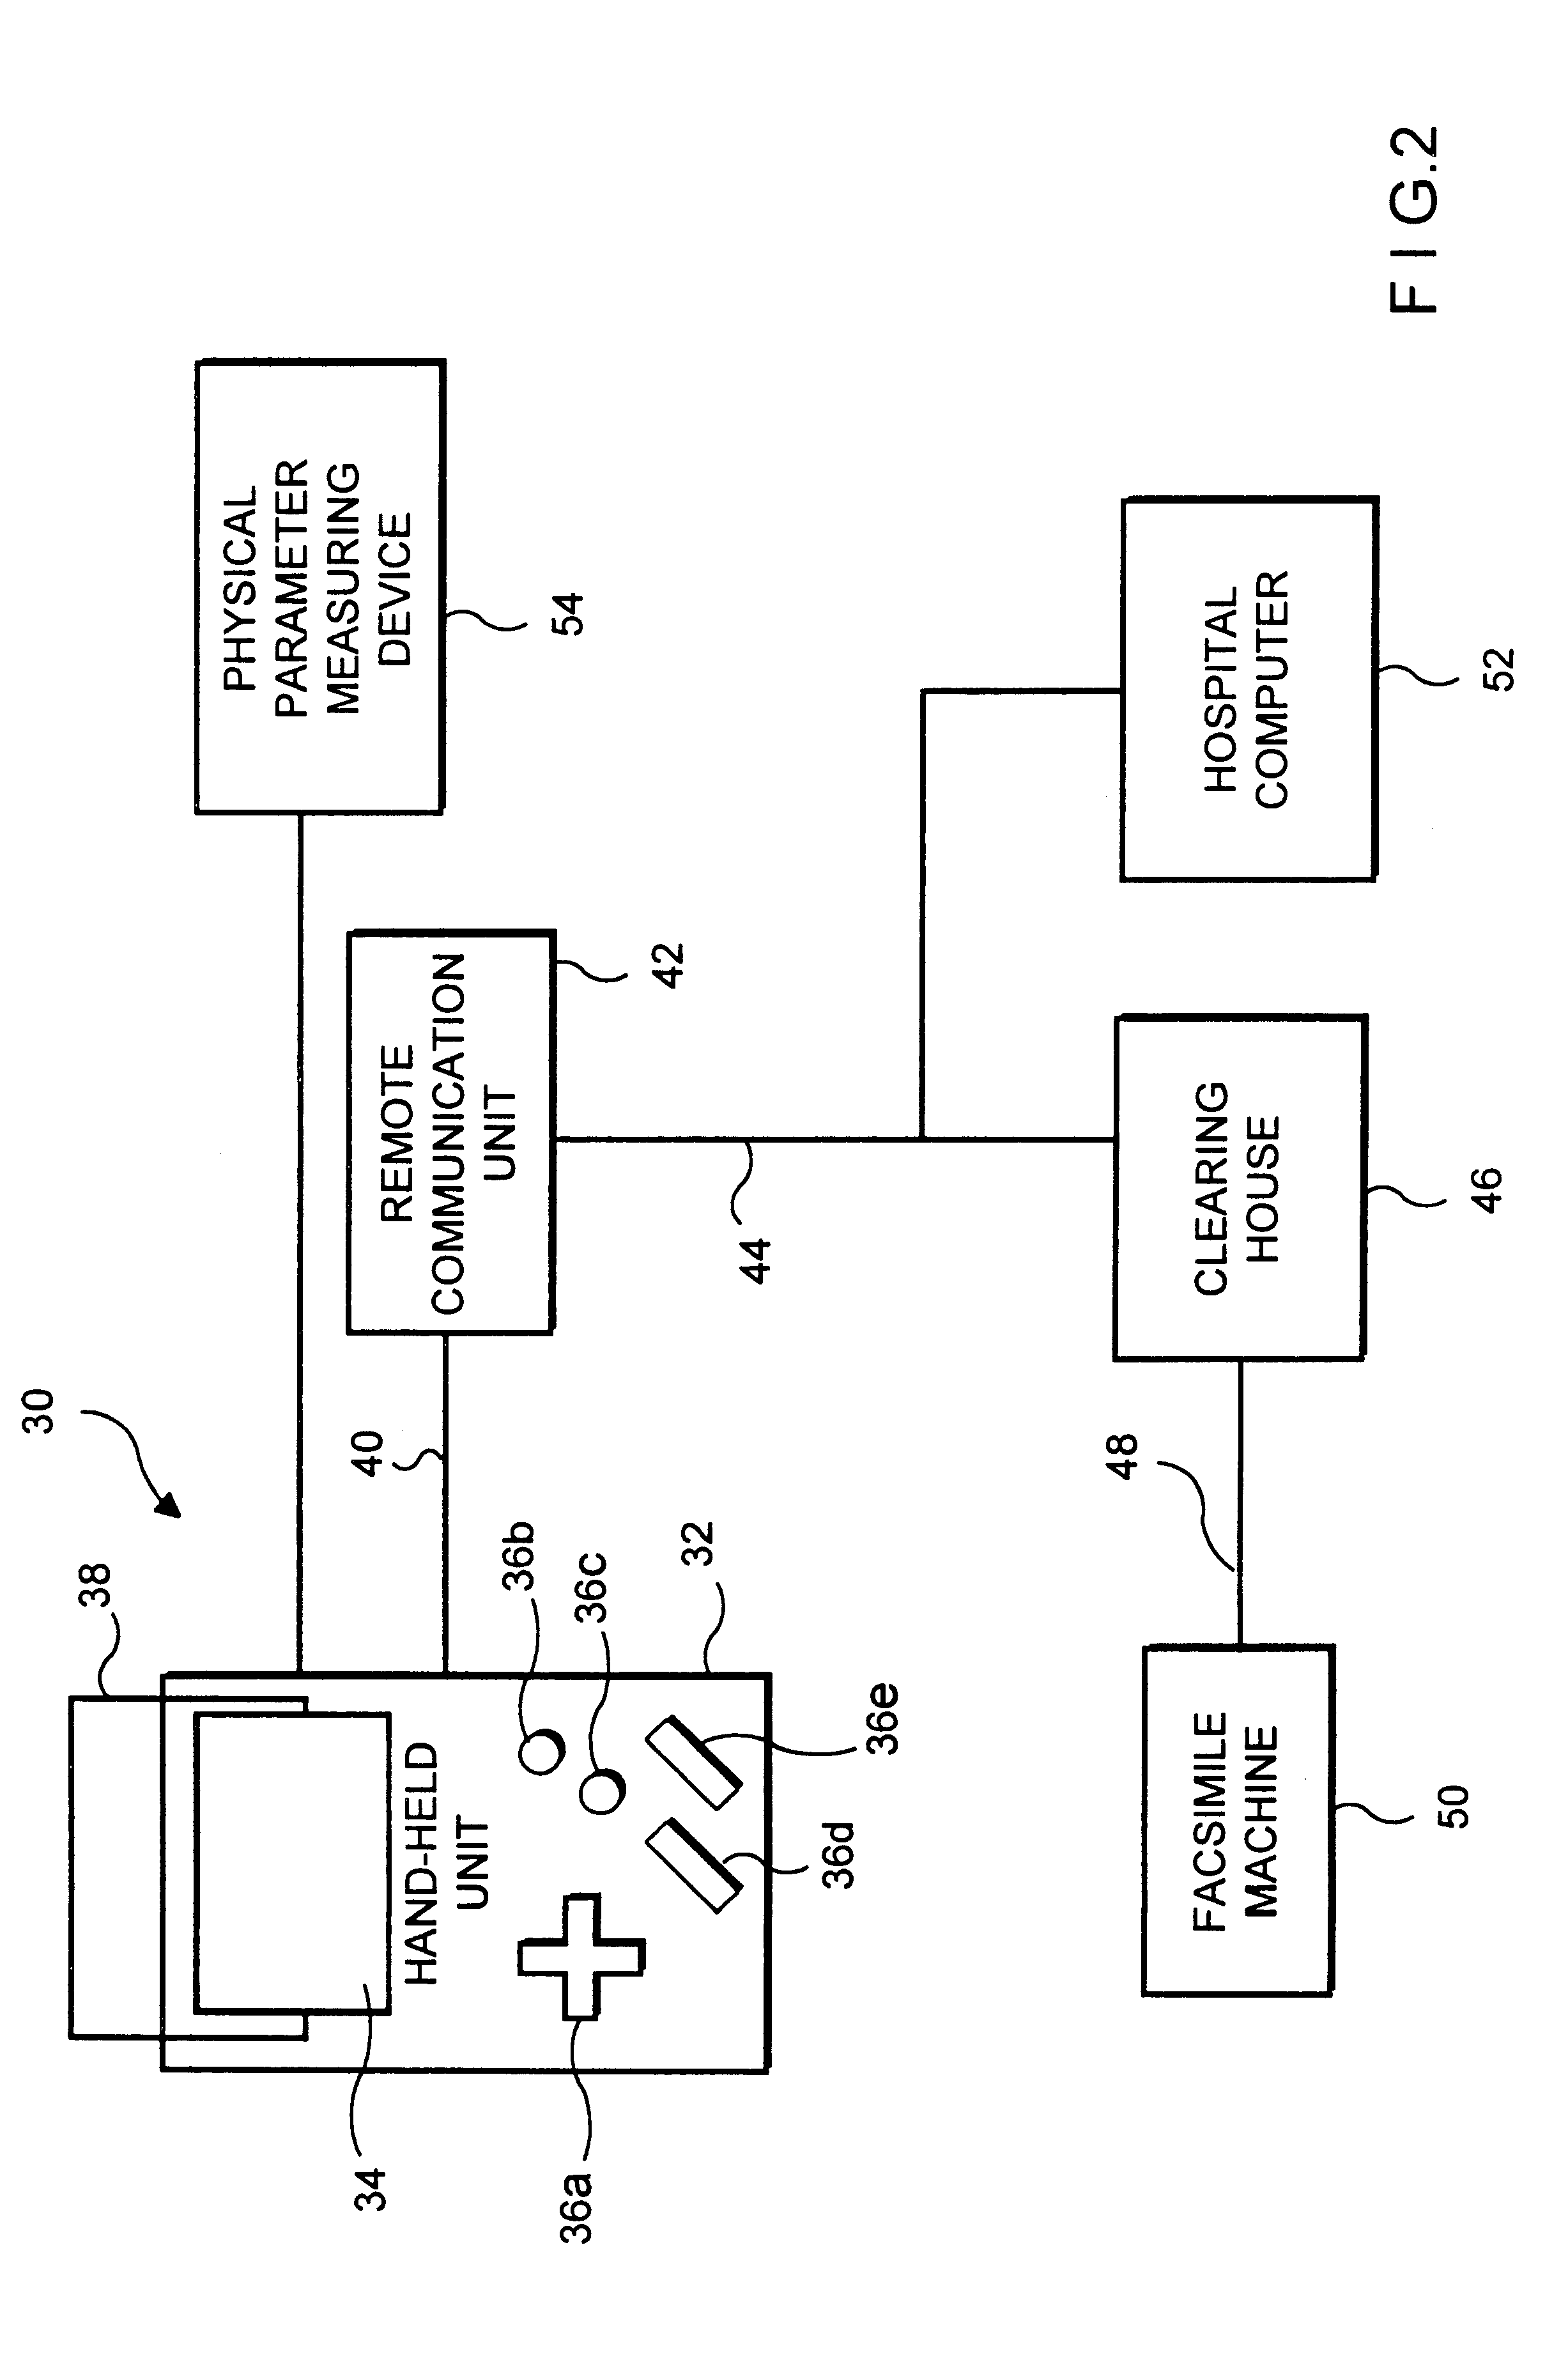 Method for diagnosis and treatment of psychological and emotional conditions using a microprocessor-based virtual reality simulator